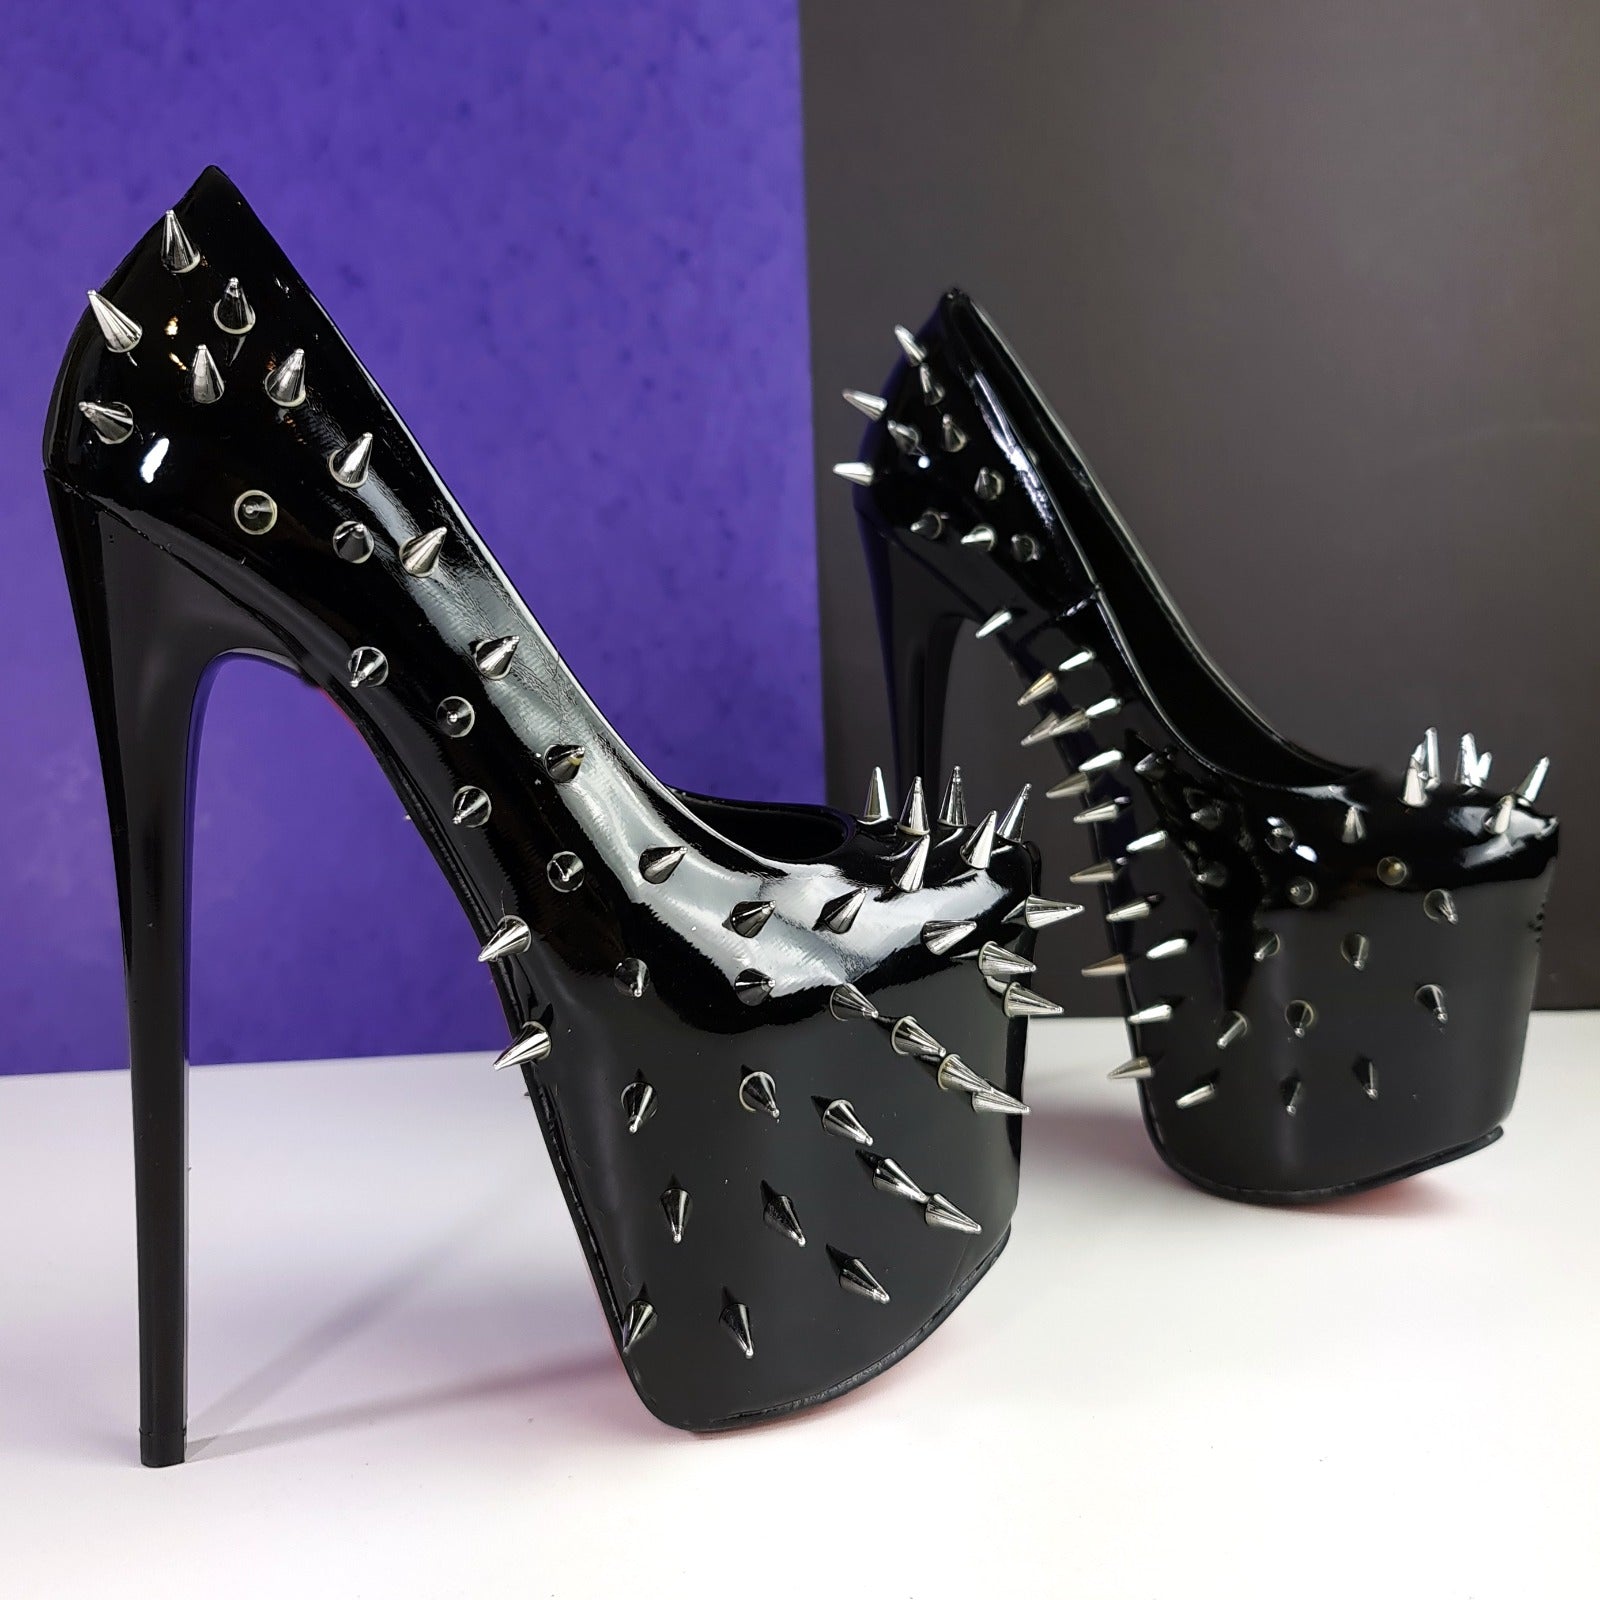 Versace - Spiked Pin Point High Heels in Black Versace